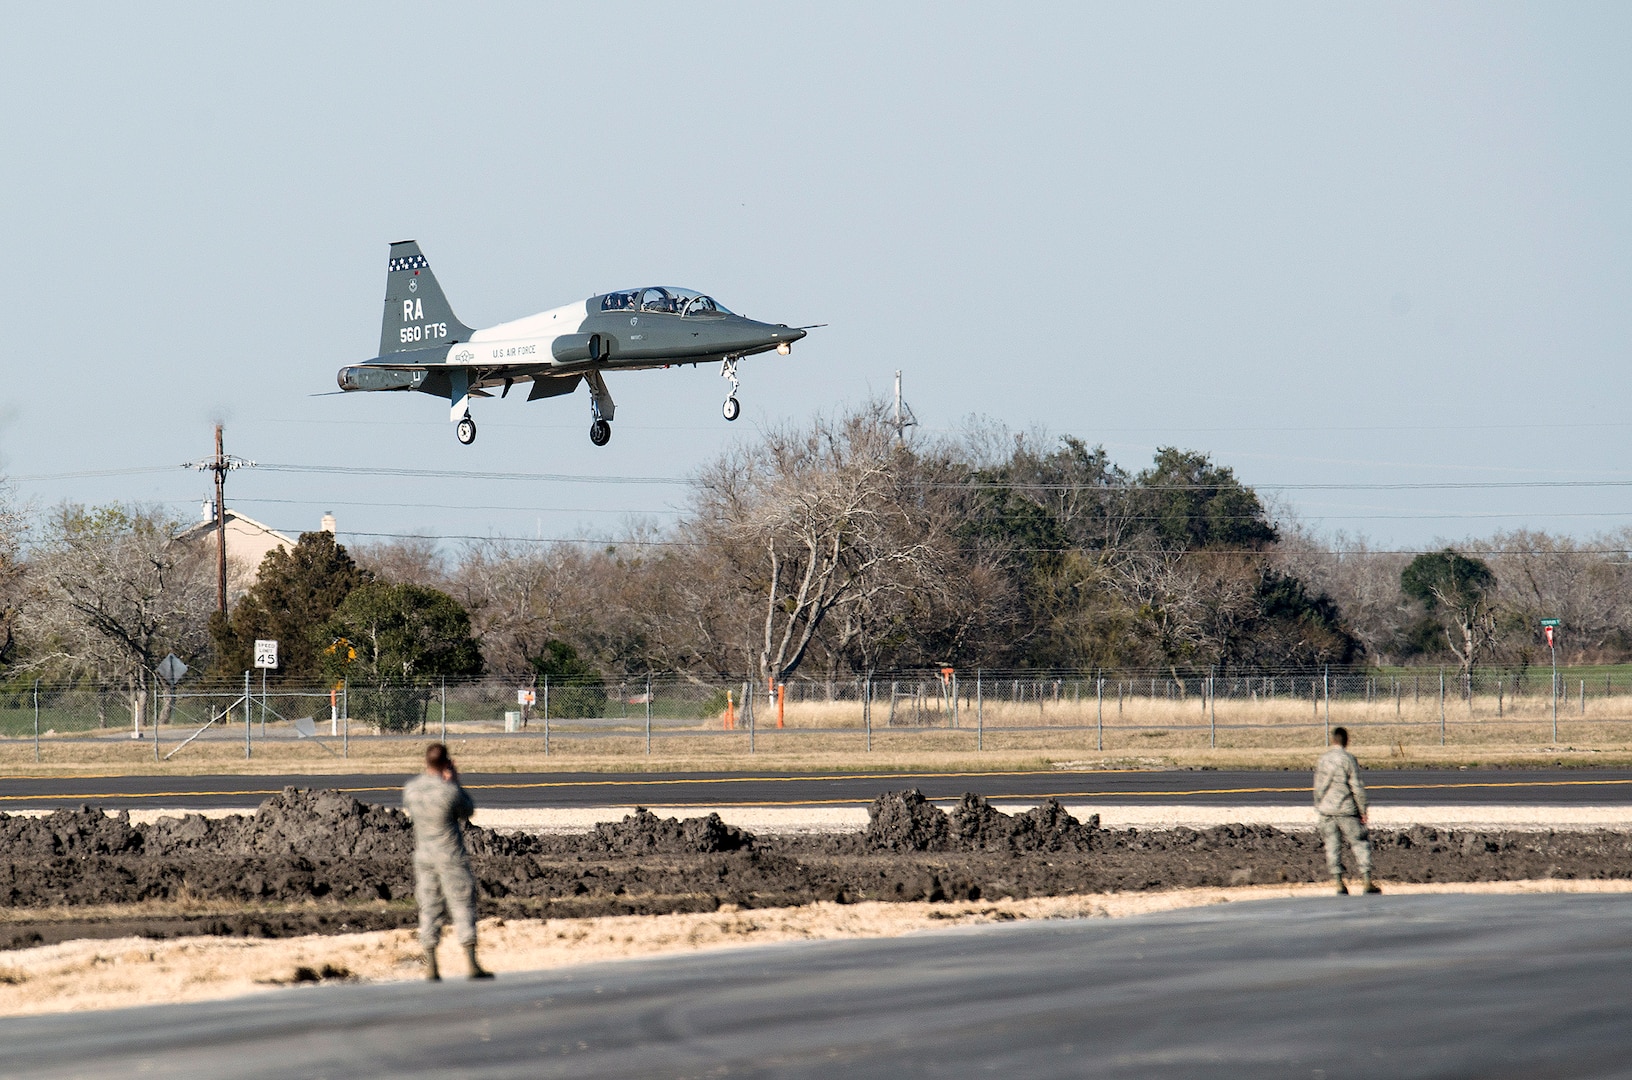 A T-38C Talon lands at the Joint Base San Antonio-Seguin Auxiliary Airfield during a ribbon-cutting event signifying the reopening of the airfield Jan. 20, 2015, after completion of a three-year construction project. The airfield continues to serve the 12th Flying Training Wing’s mission while meeting the challenges posed by the novel coronavirus pandemic.